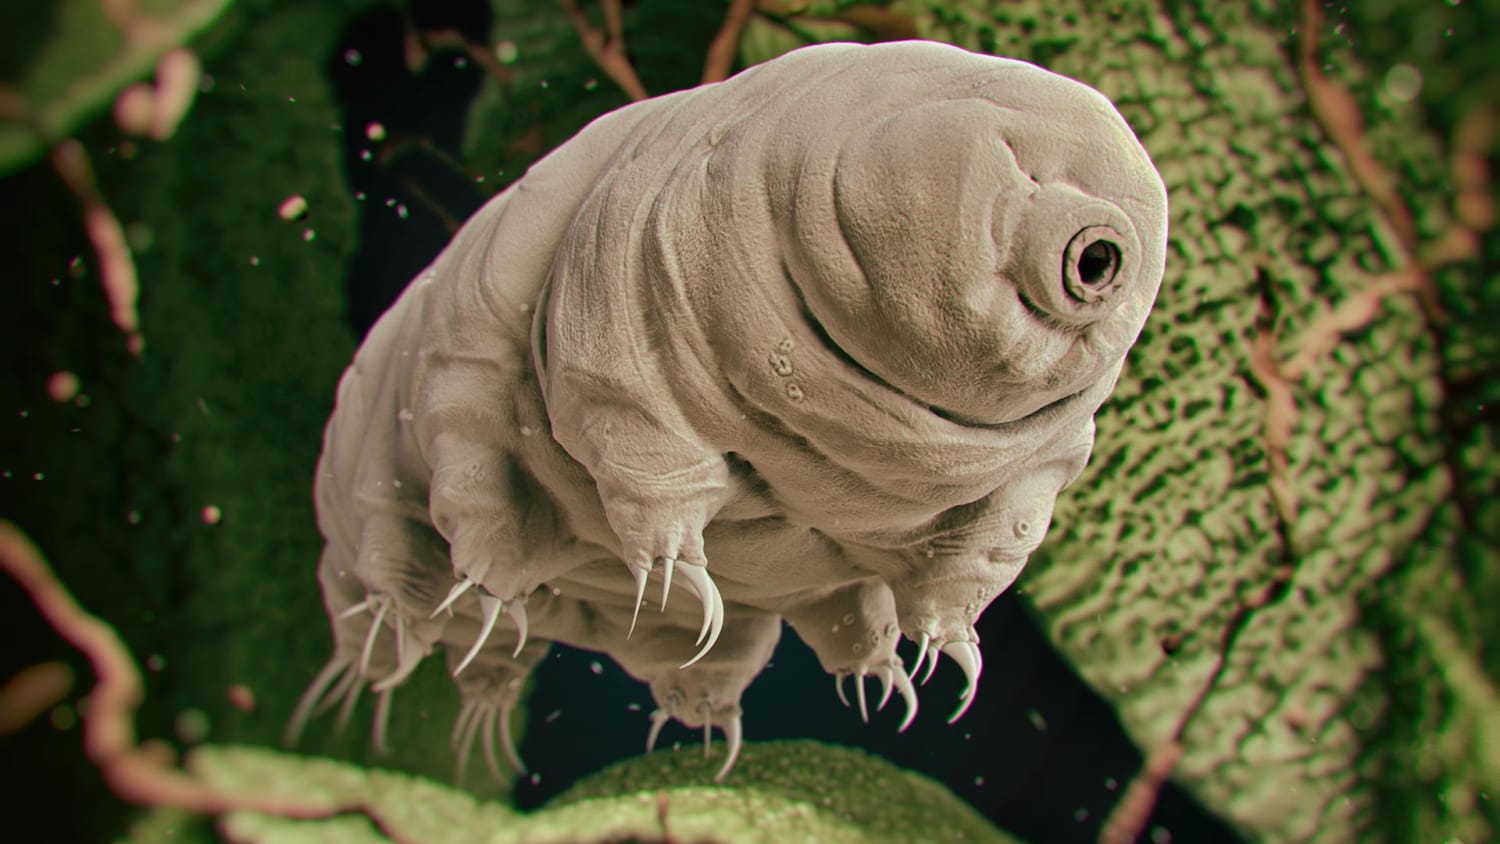 The Tardigrade, otherwise known as the Water Bear is one of the most badass animals on earth. These guys are known for resilience and are said to be able to adapt to the most extreme of environments, more than any other animal on earth. They have been exposed to outer space and survived, metal.